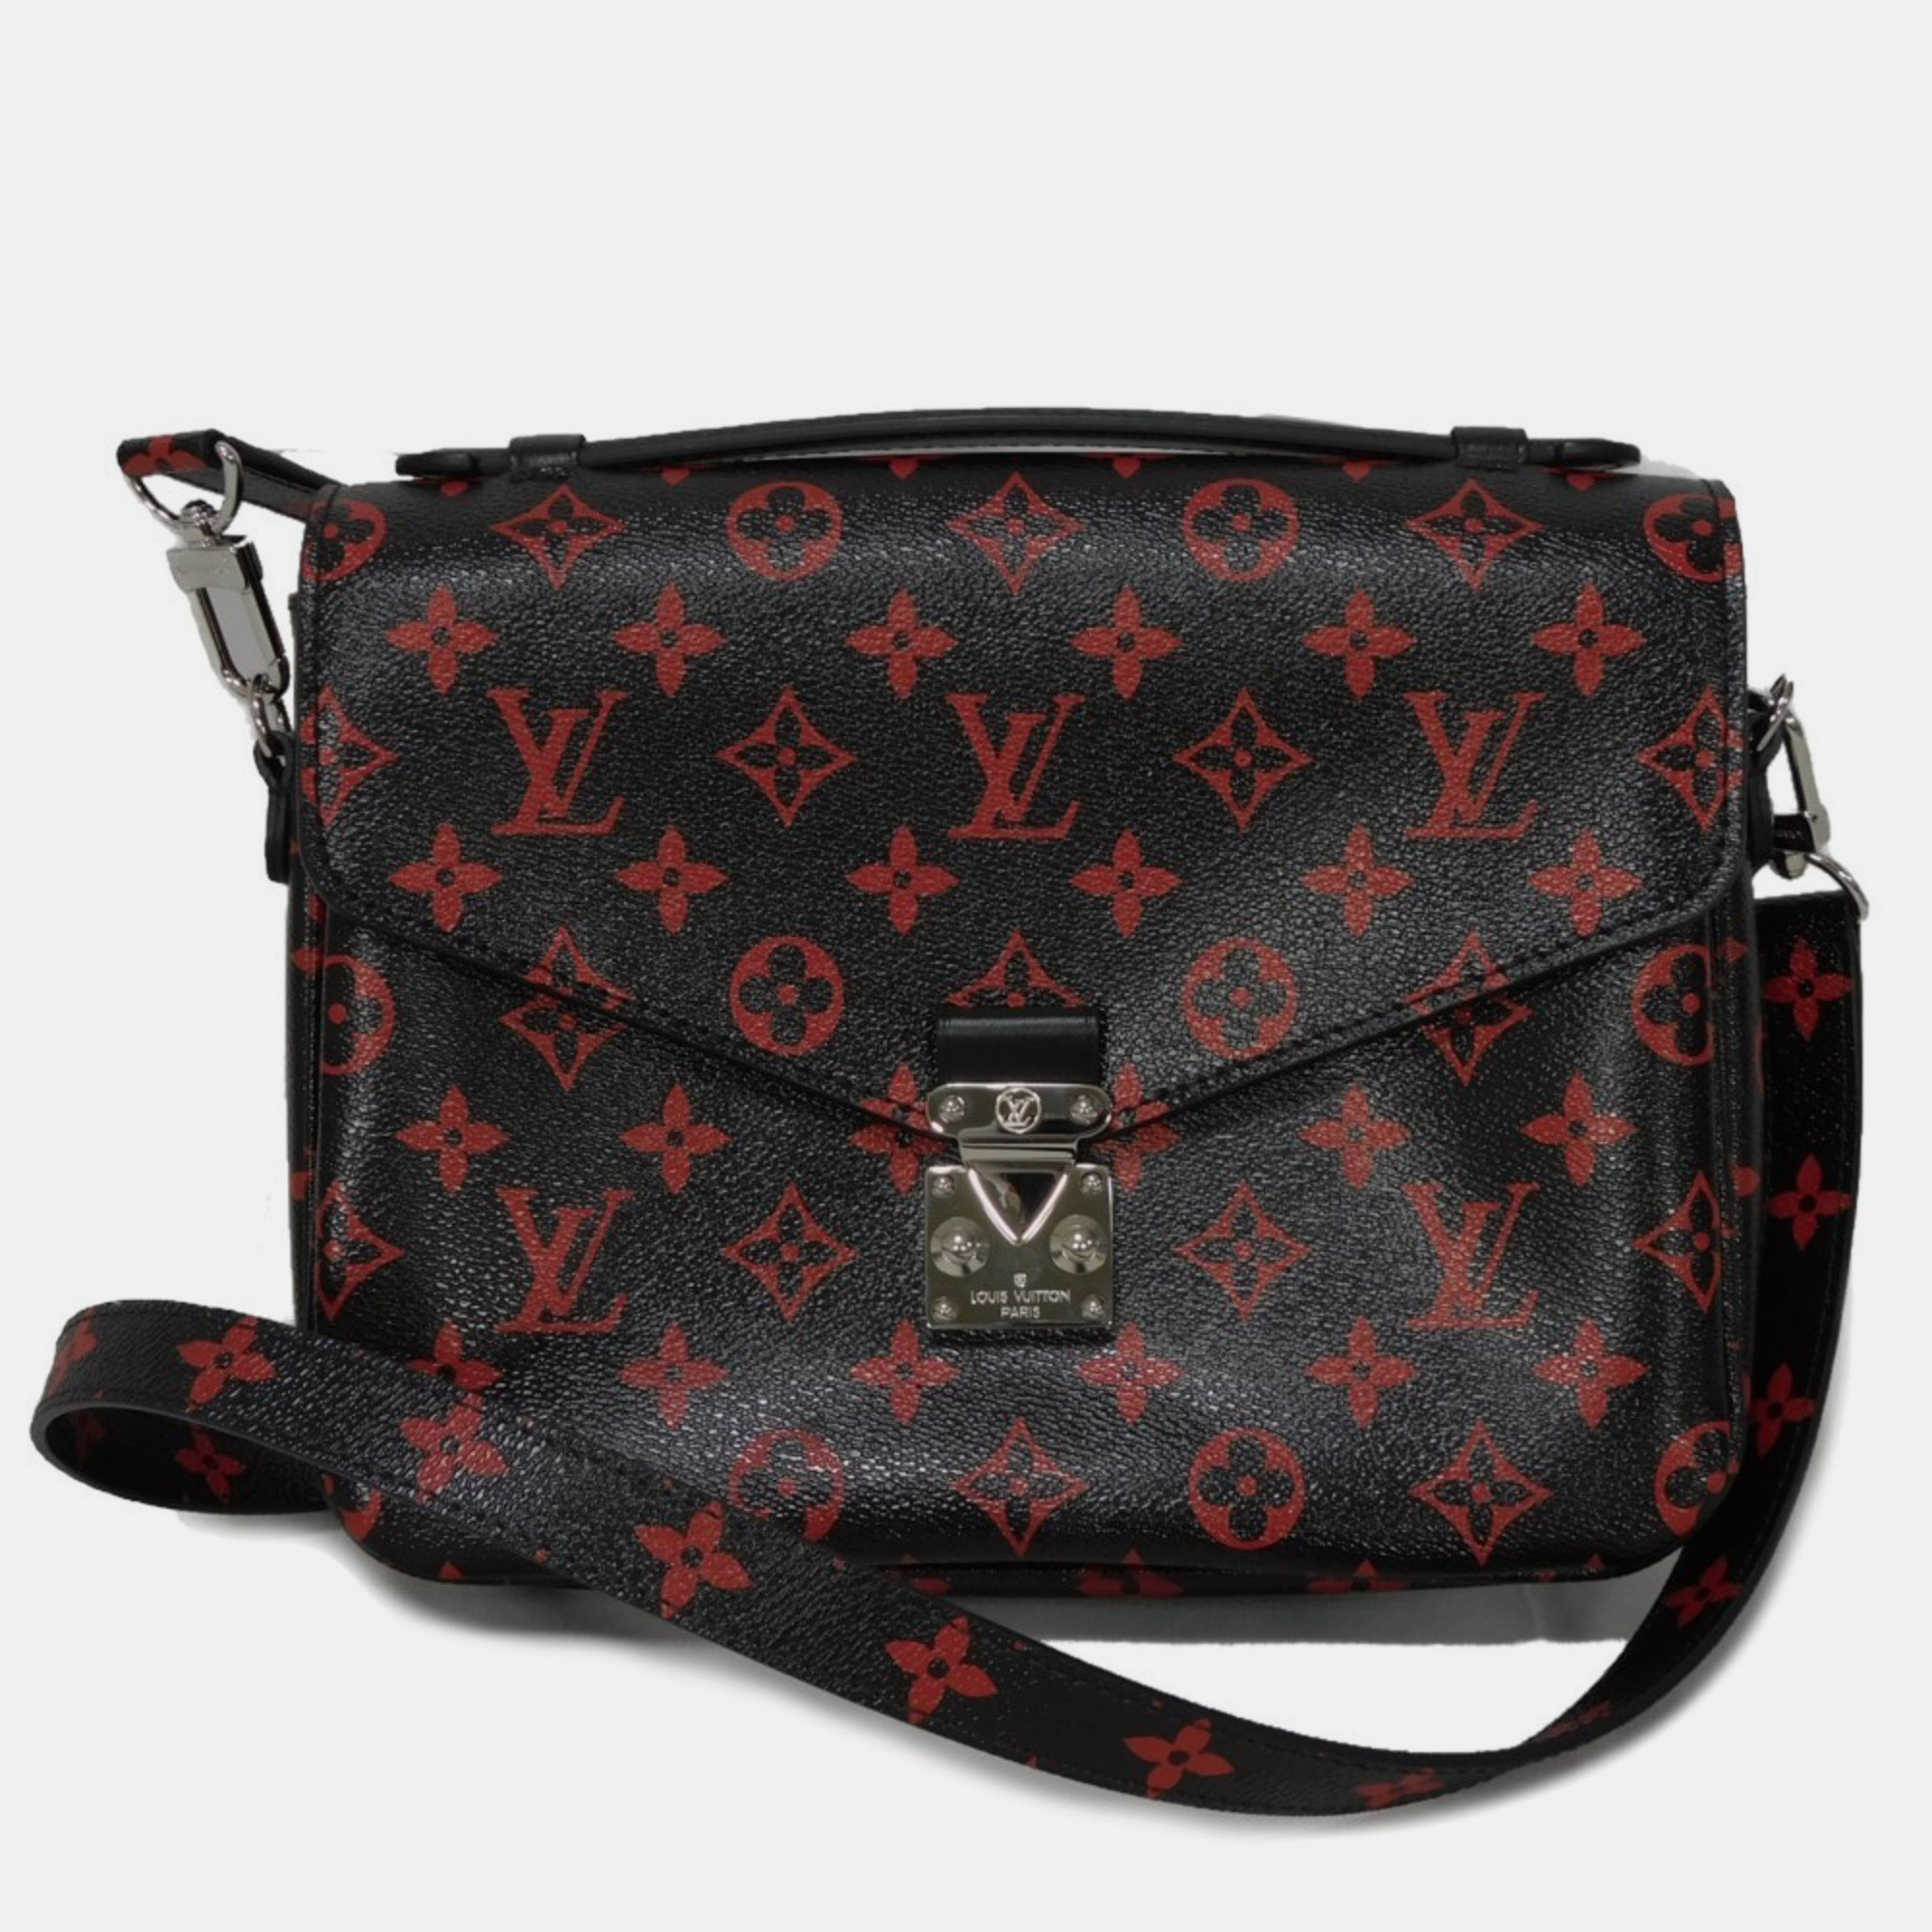 This Louis Vuitton elegant shoulder bag is perfect to enhance your everyday style. It is carefully sewn and finished to be a wonderful investment in your closet.